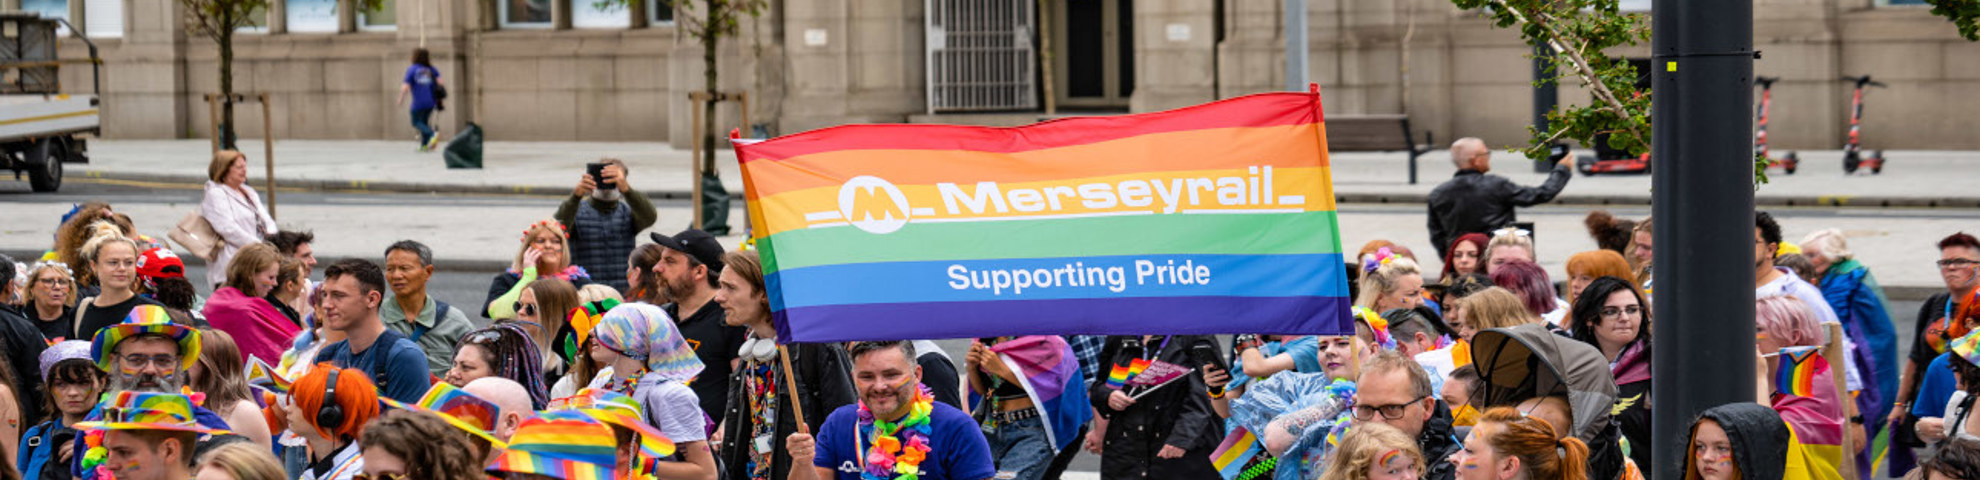 Merseyrail staff attending pride, with two members of staff holding a large banner of the rainbow-coloured flag with the Merseyrail logo on 